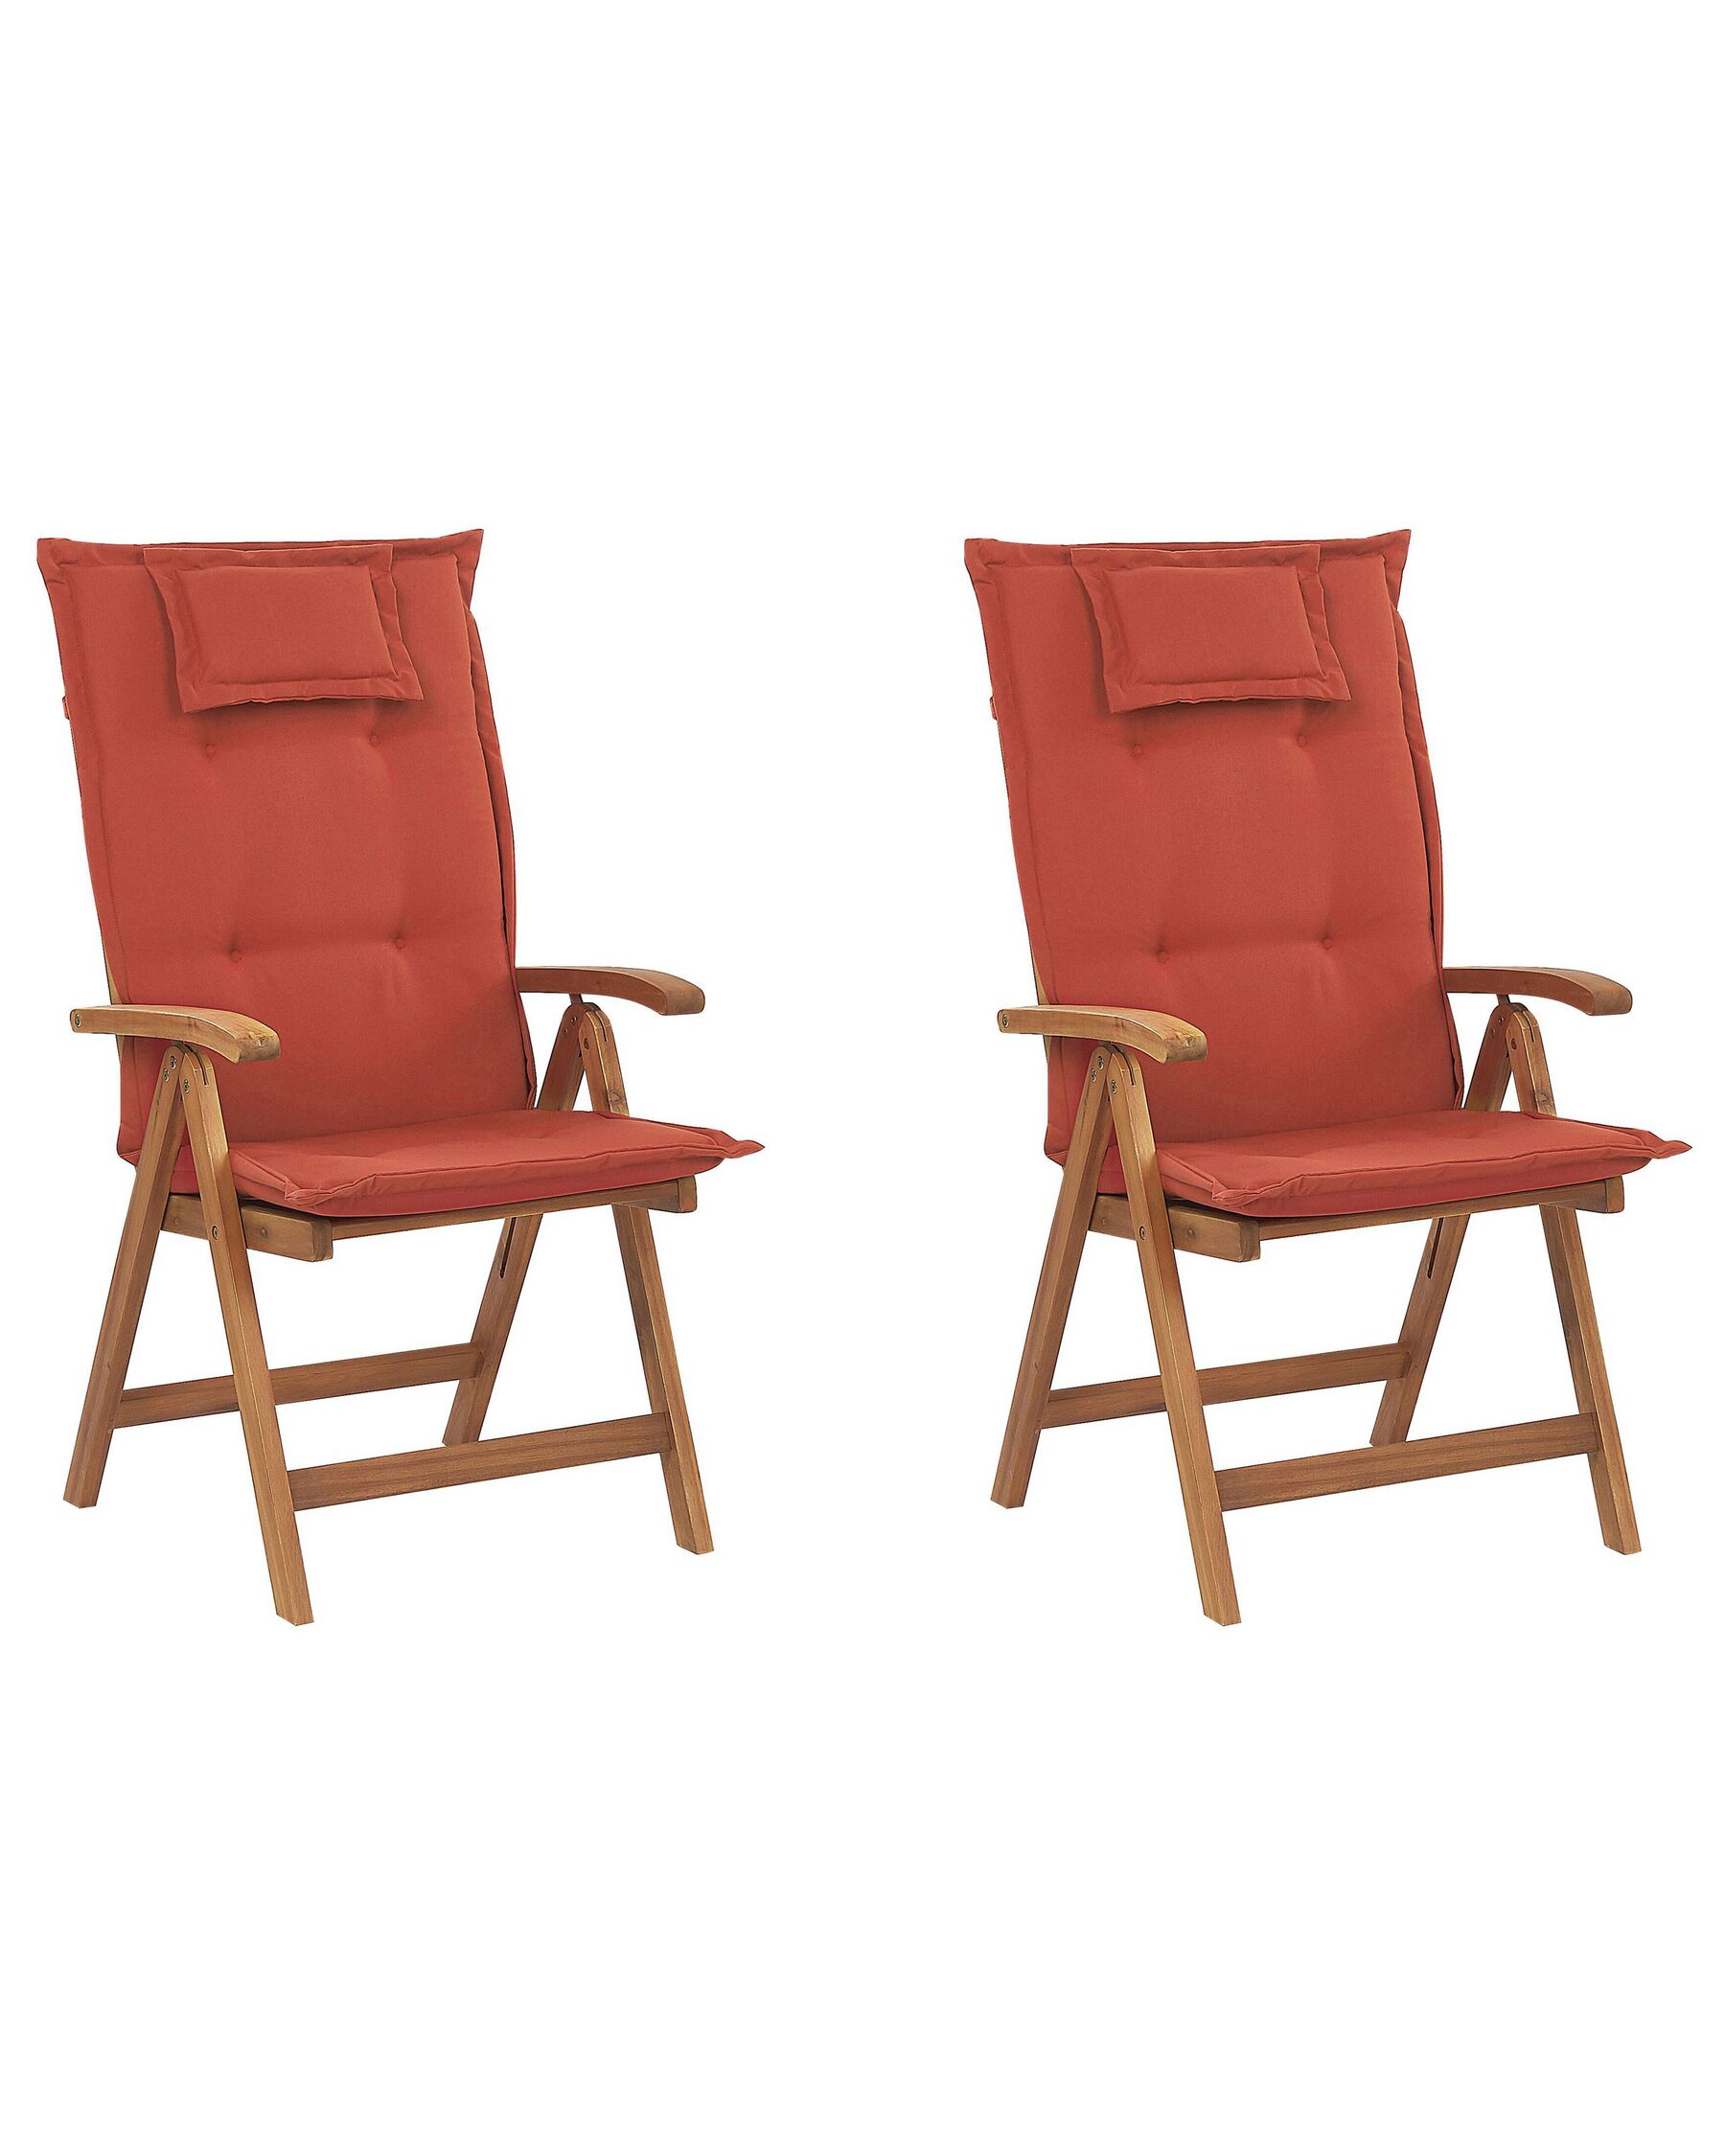 Set of 2 Acacia Wood Garden Folding Chairs with Red Cushions JAVA_787736